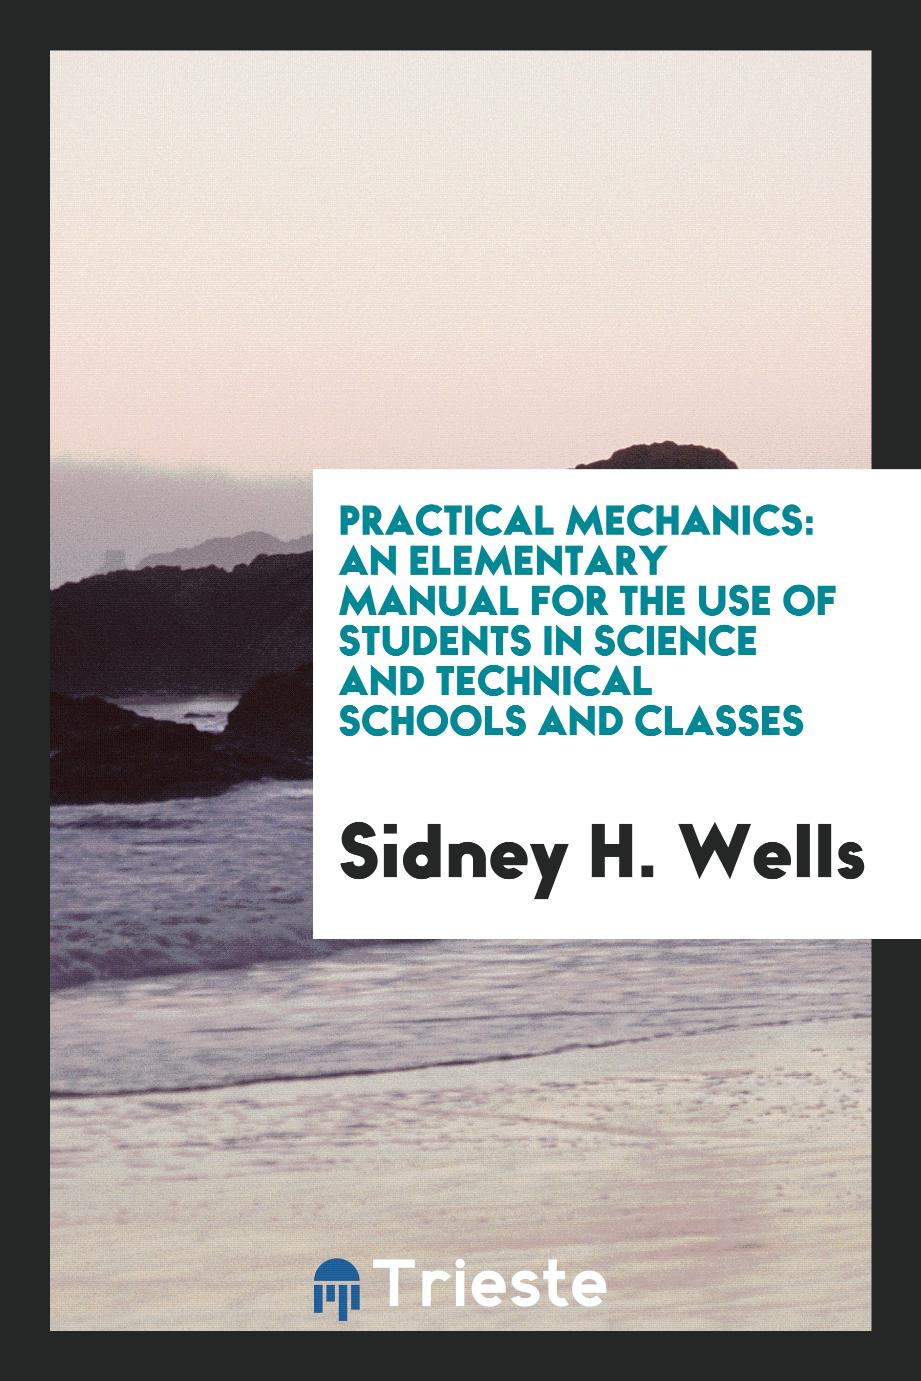 Practical Mechanics: An Elementary Manual for the Use of Students in Science and Technical Schools and Classes